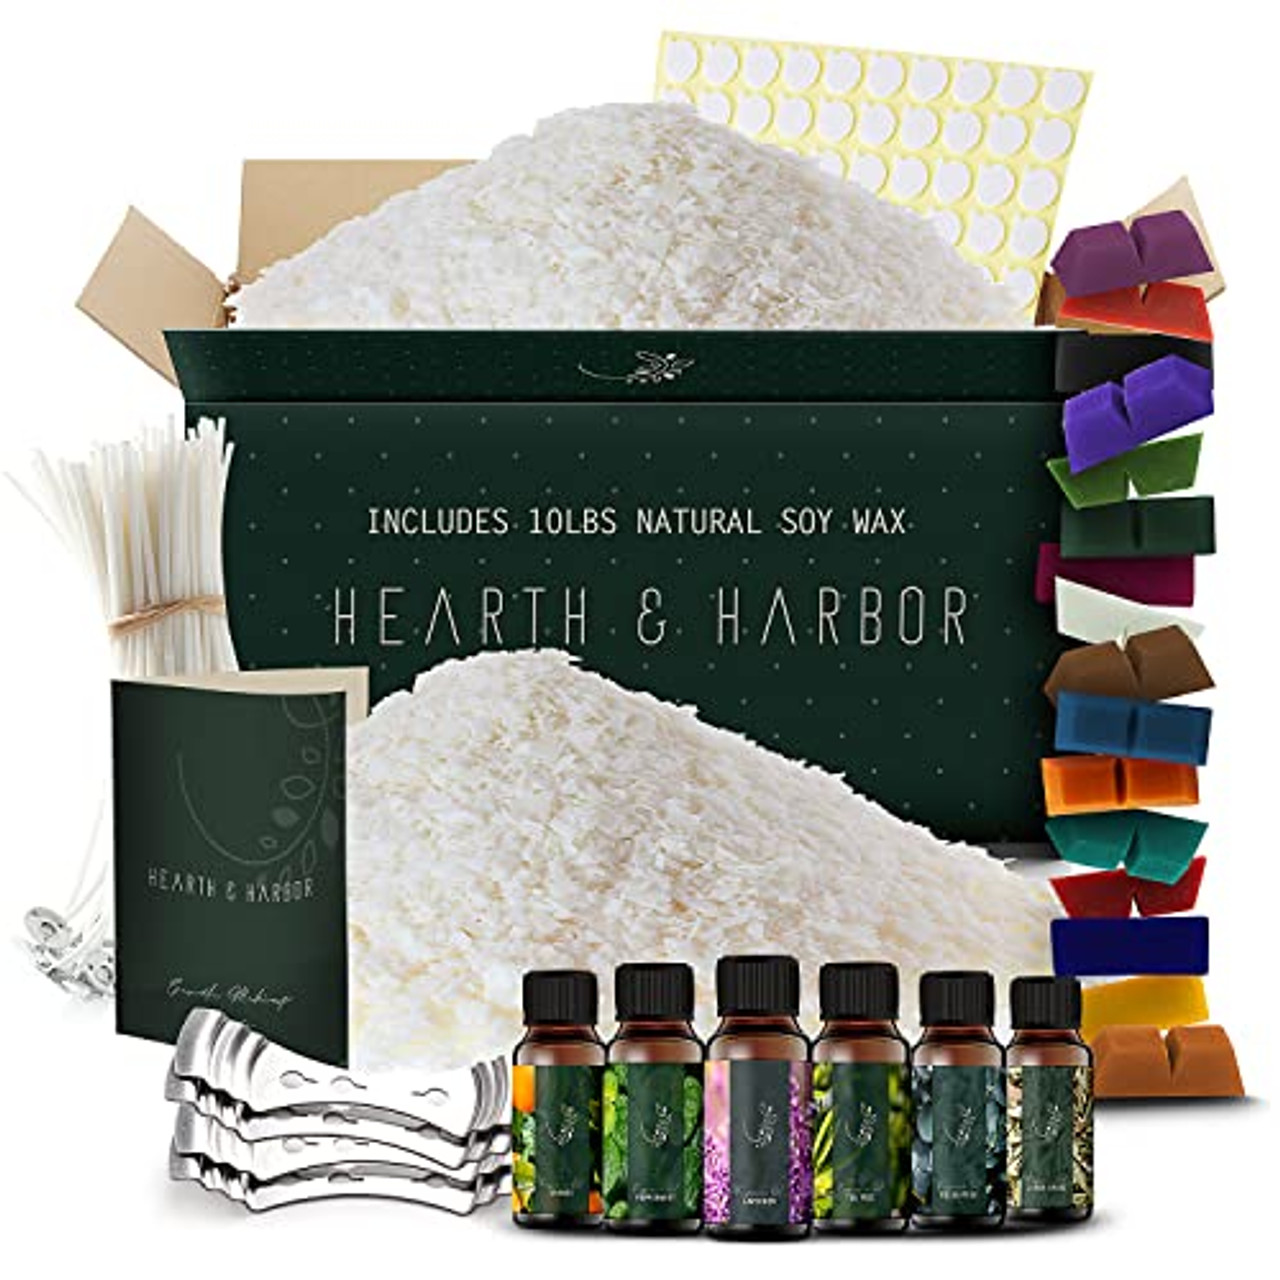 Hearth & Harbor Premium Fragrance Oil - Set of 6 Scented Oil for Candle Making - 6 Scented Oils